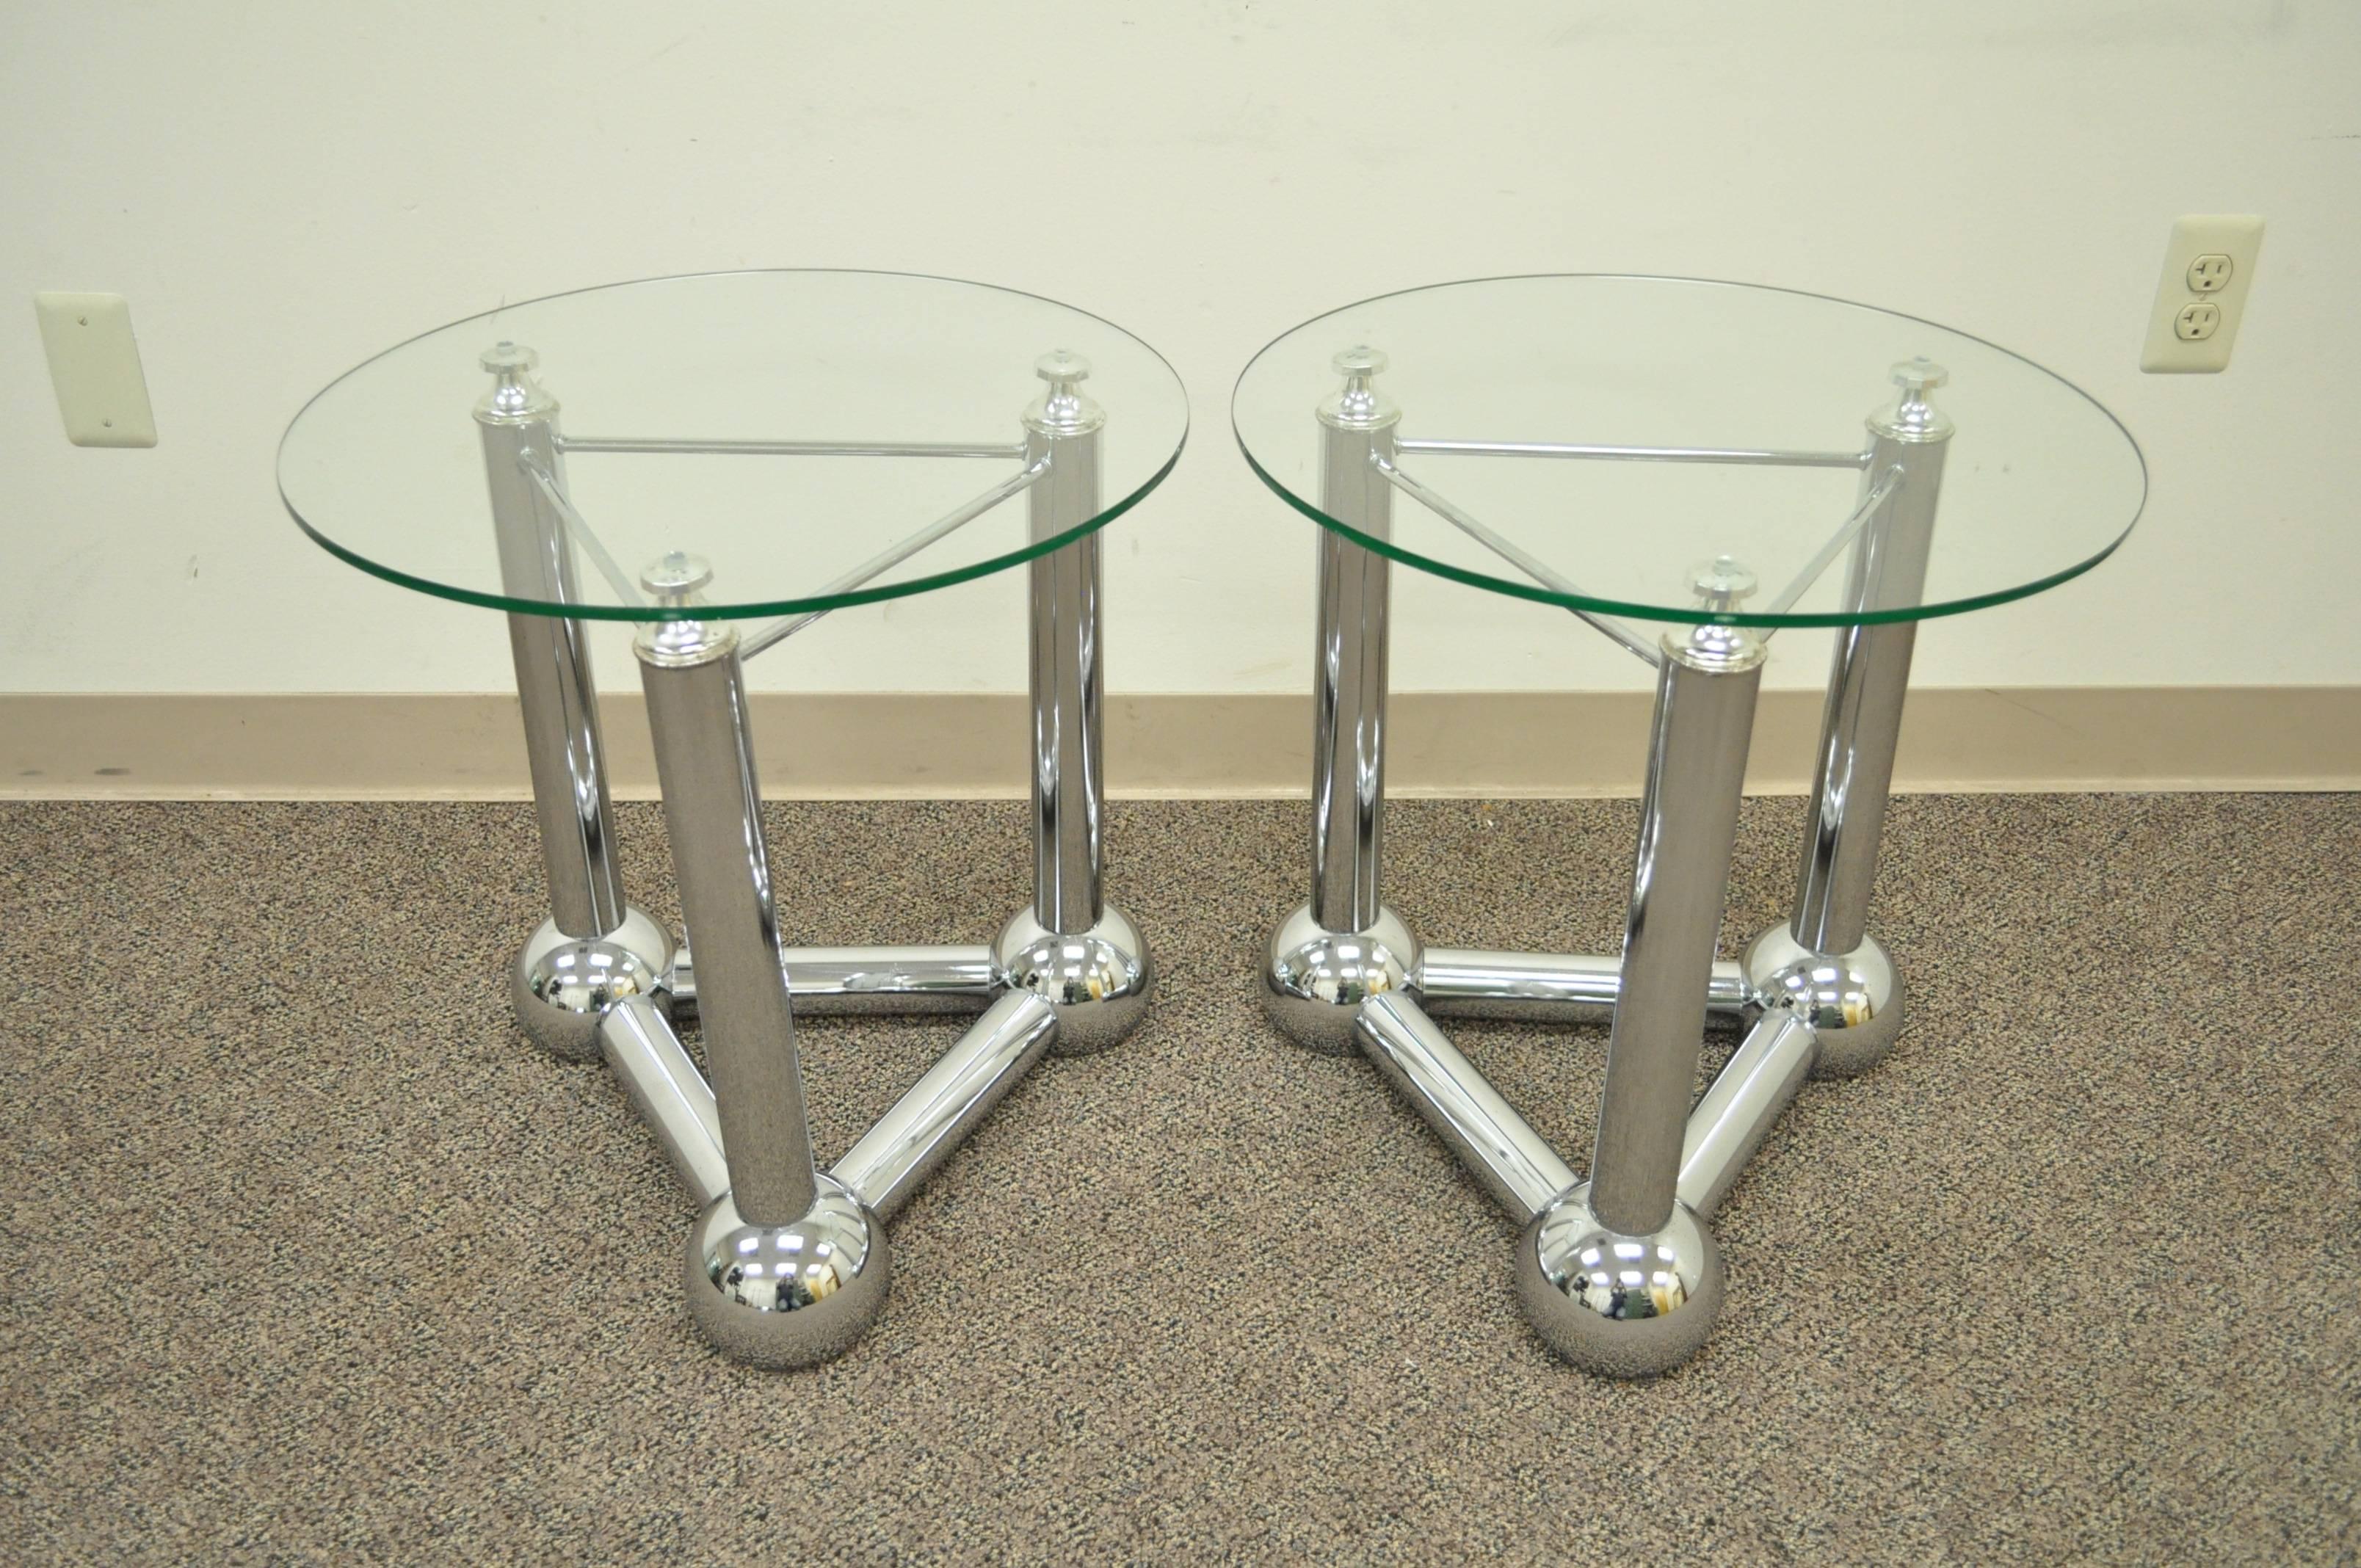 Pair of Vintage Mid Century Modern triangular base atomic form side tables. The pair features tubular chrome frames with a triple orb base and round glass tops. A very unique and interesting design that would make a great addition to any modern